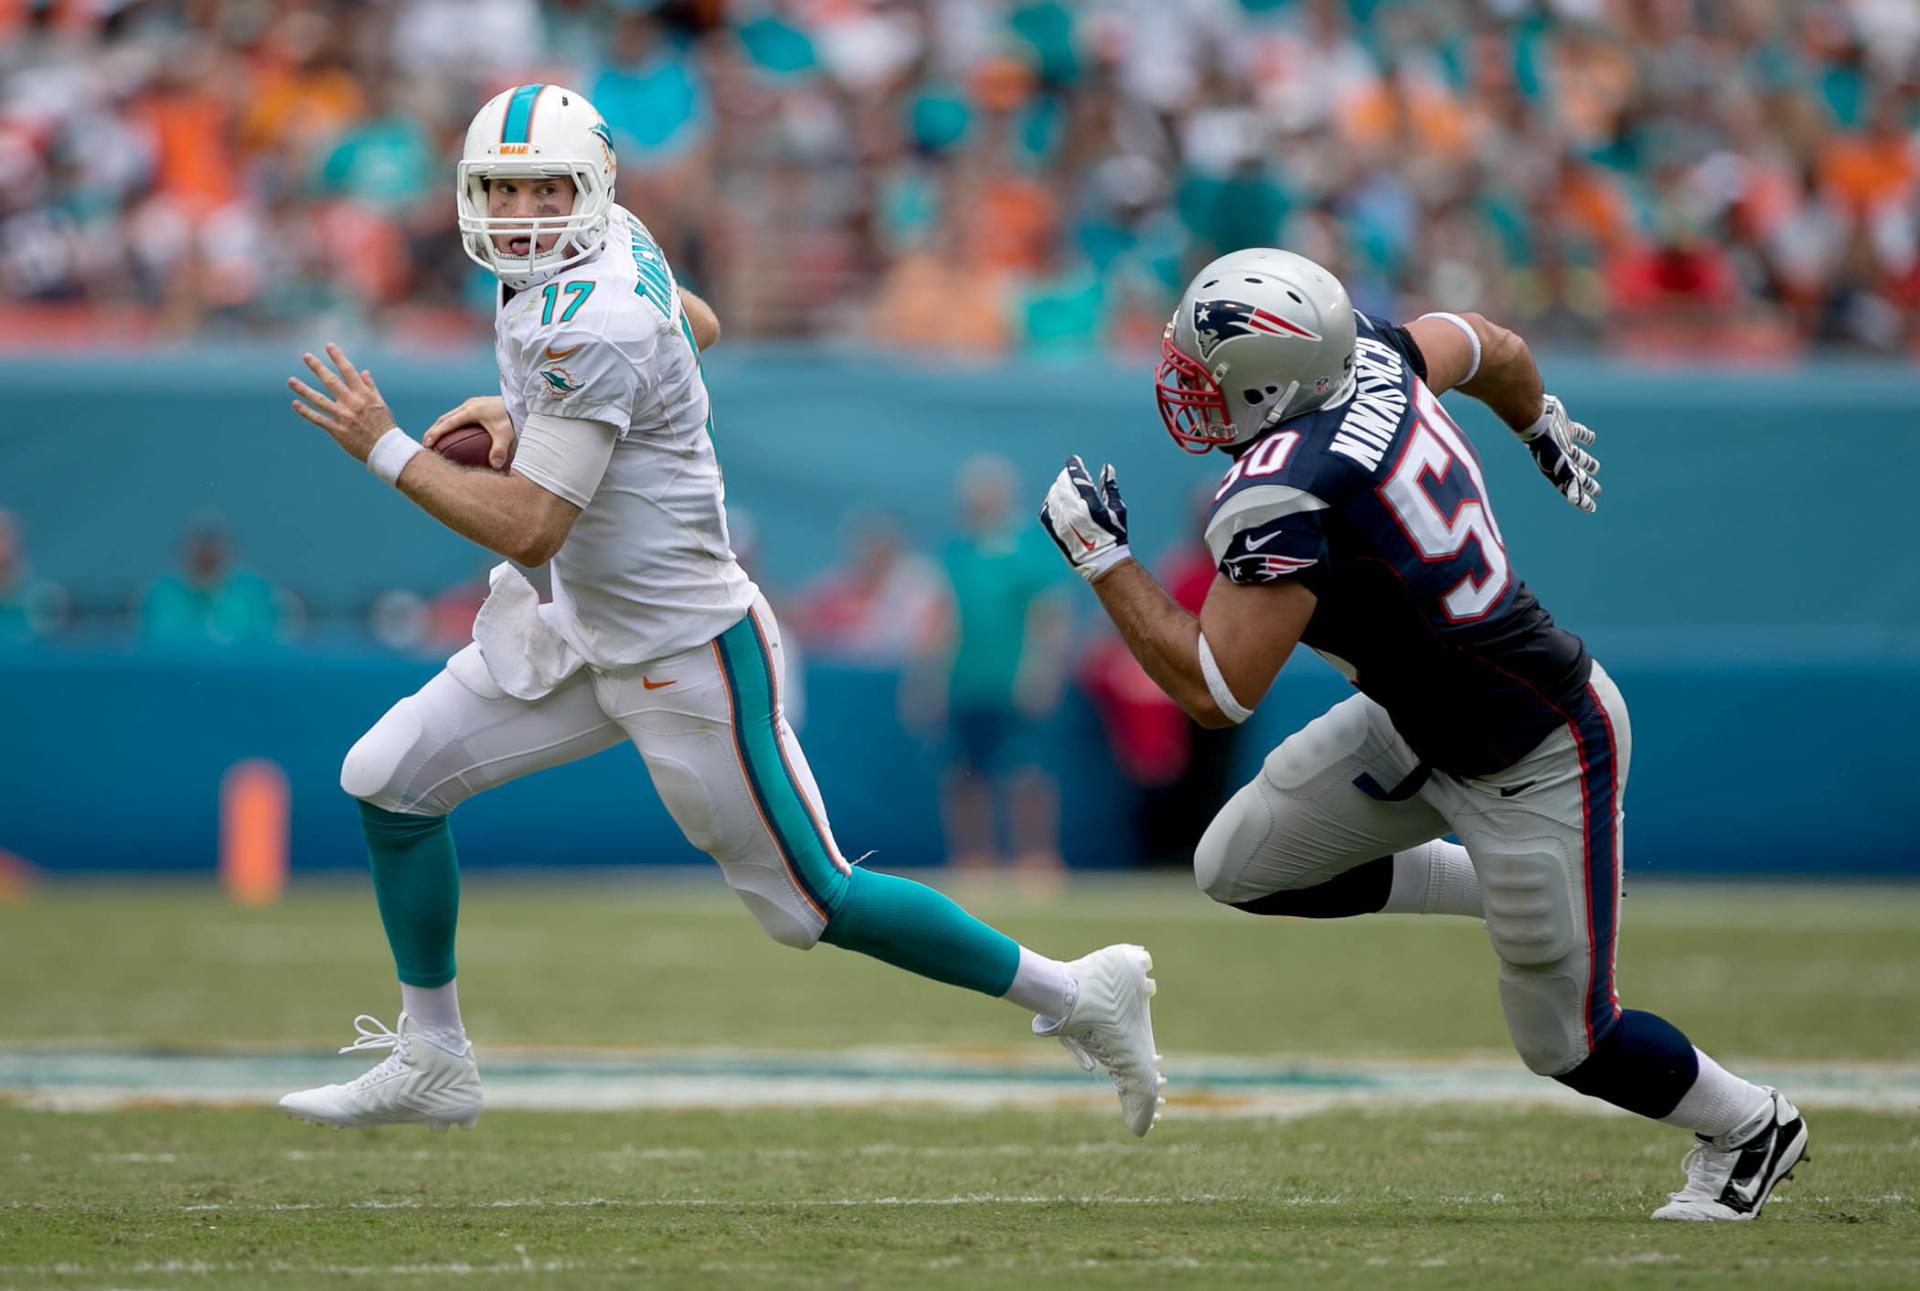 Miami Dolphins HD Wallpaper Full HD Pictures